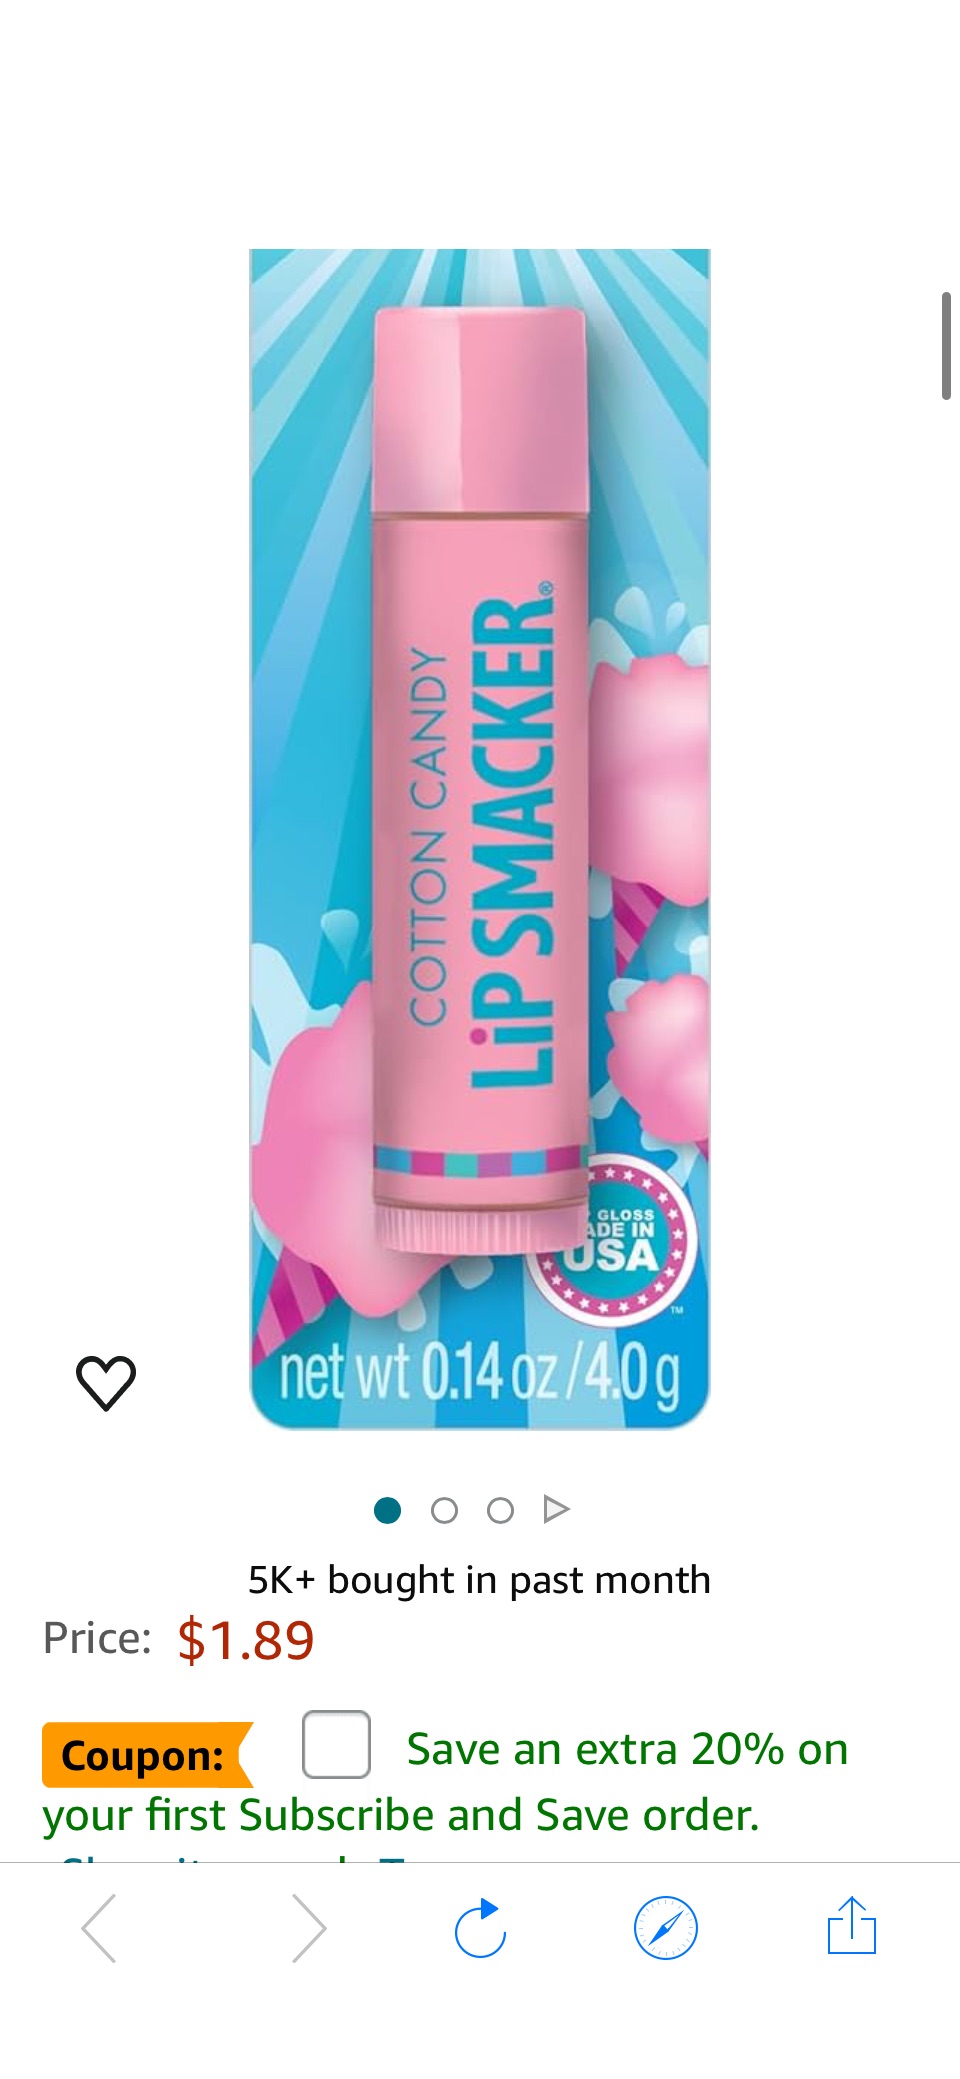 Amazon.com: Lip Smacker Flavored Lip Balm, Cotton Candy, Flavored, Clear, For Kids, Men, Women, Dry Kids : Beauty & Personal Care